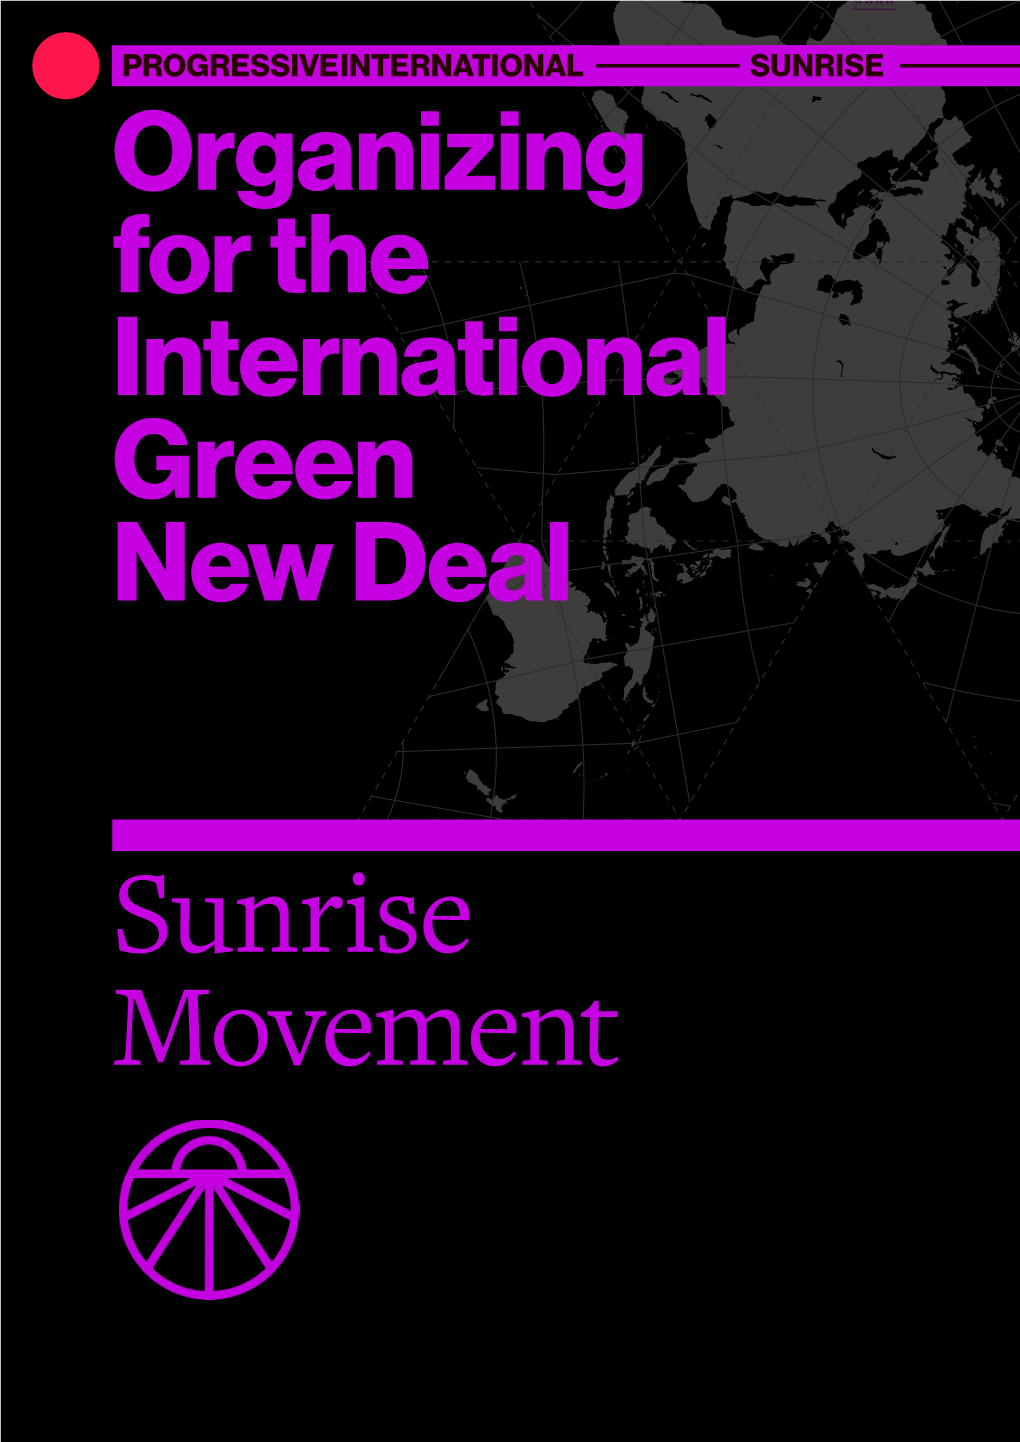 Organizing for the International Green New Deal